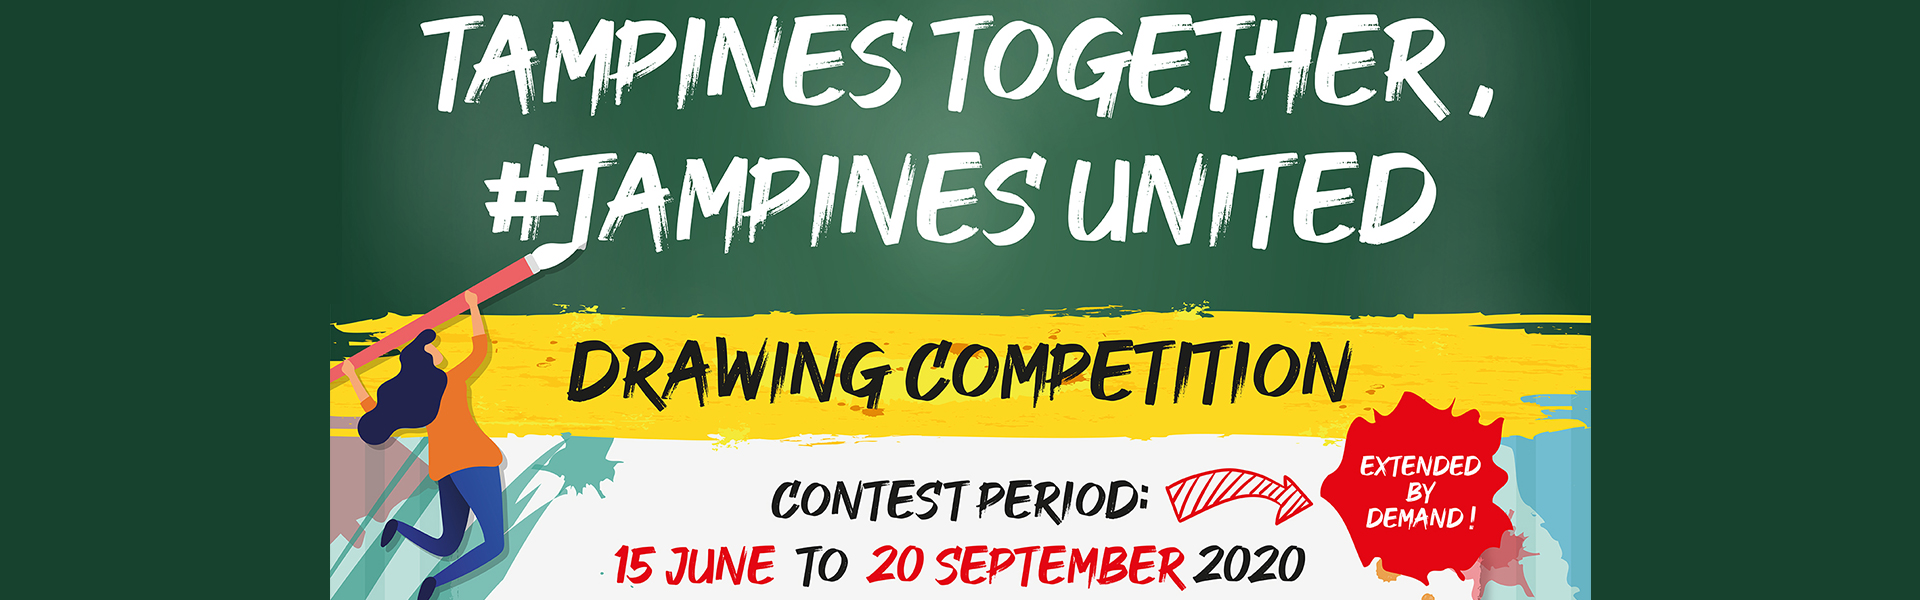 Tampines Together, #Tampines United Drawing Competition